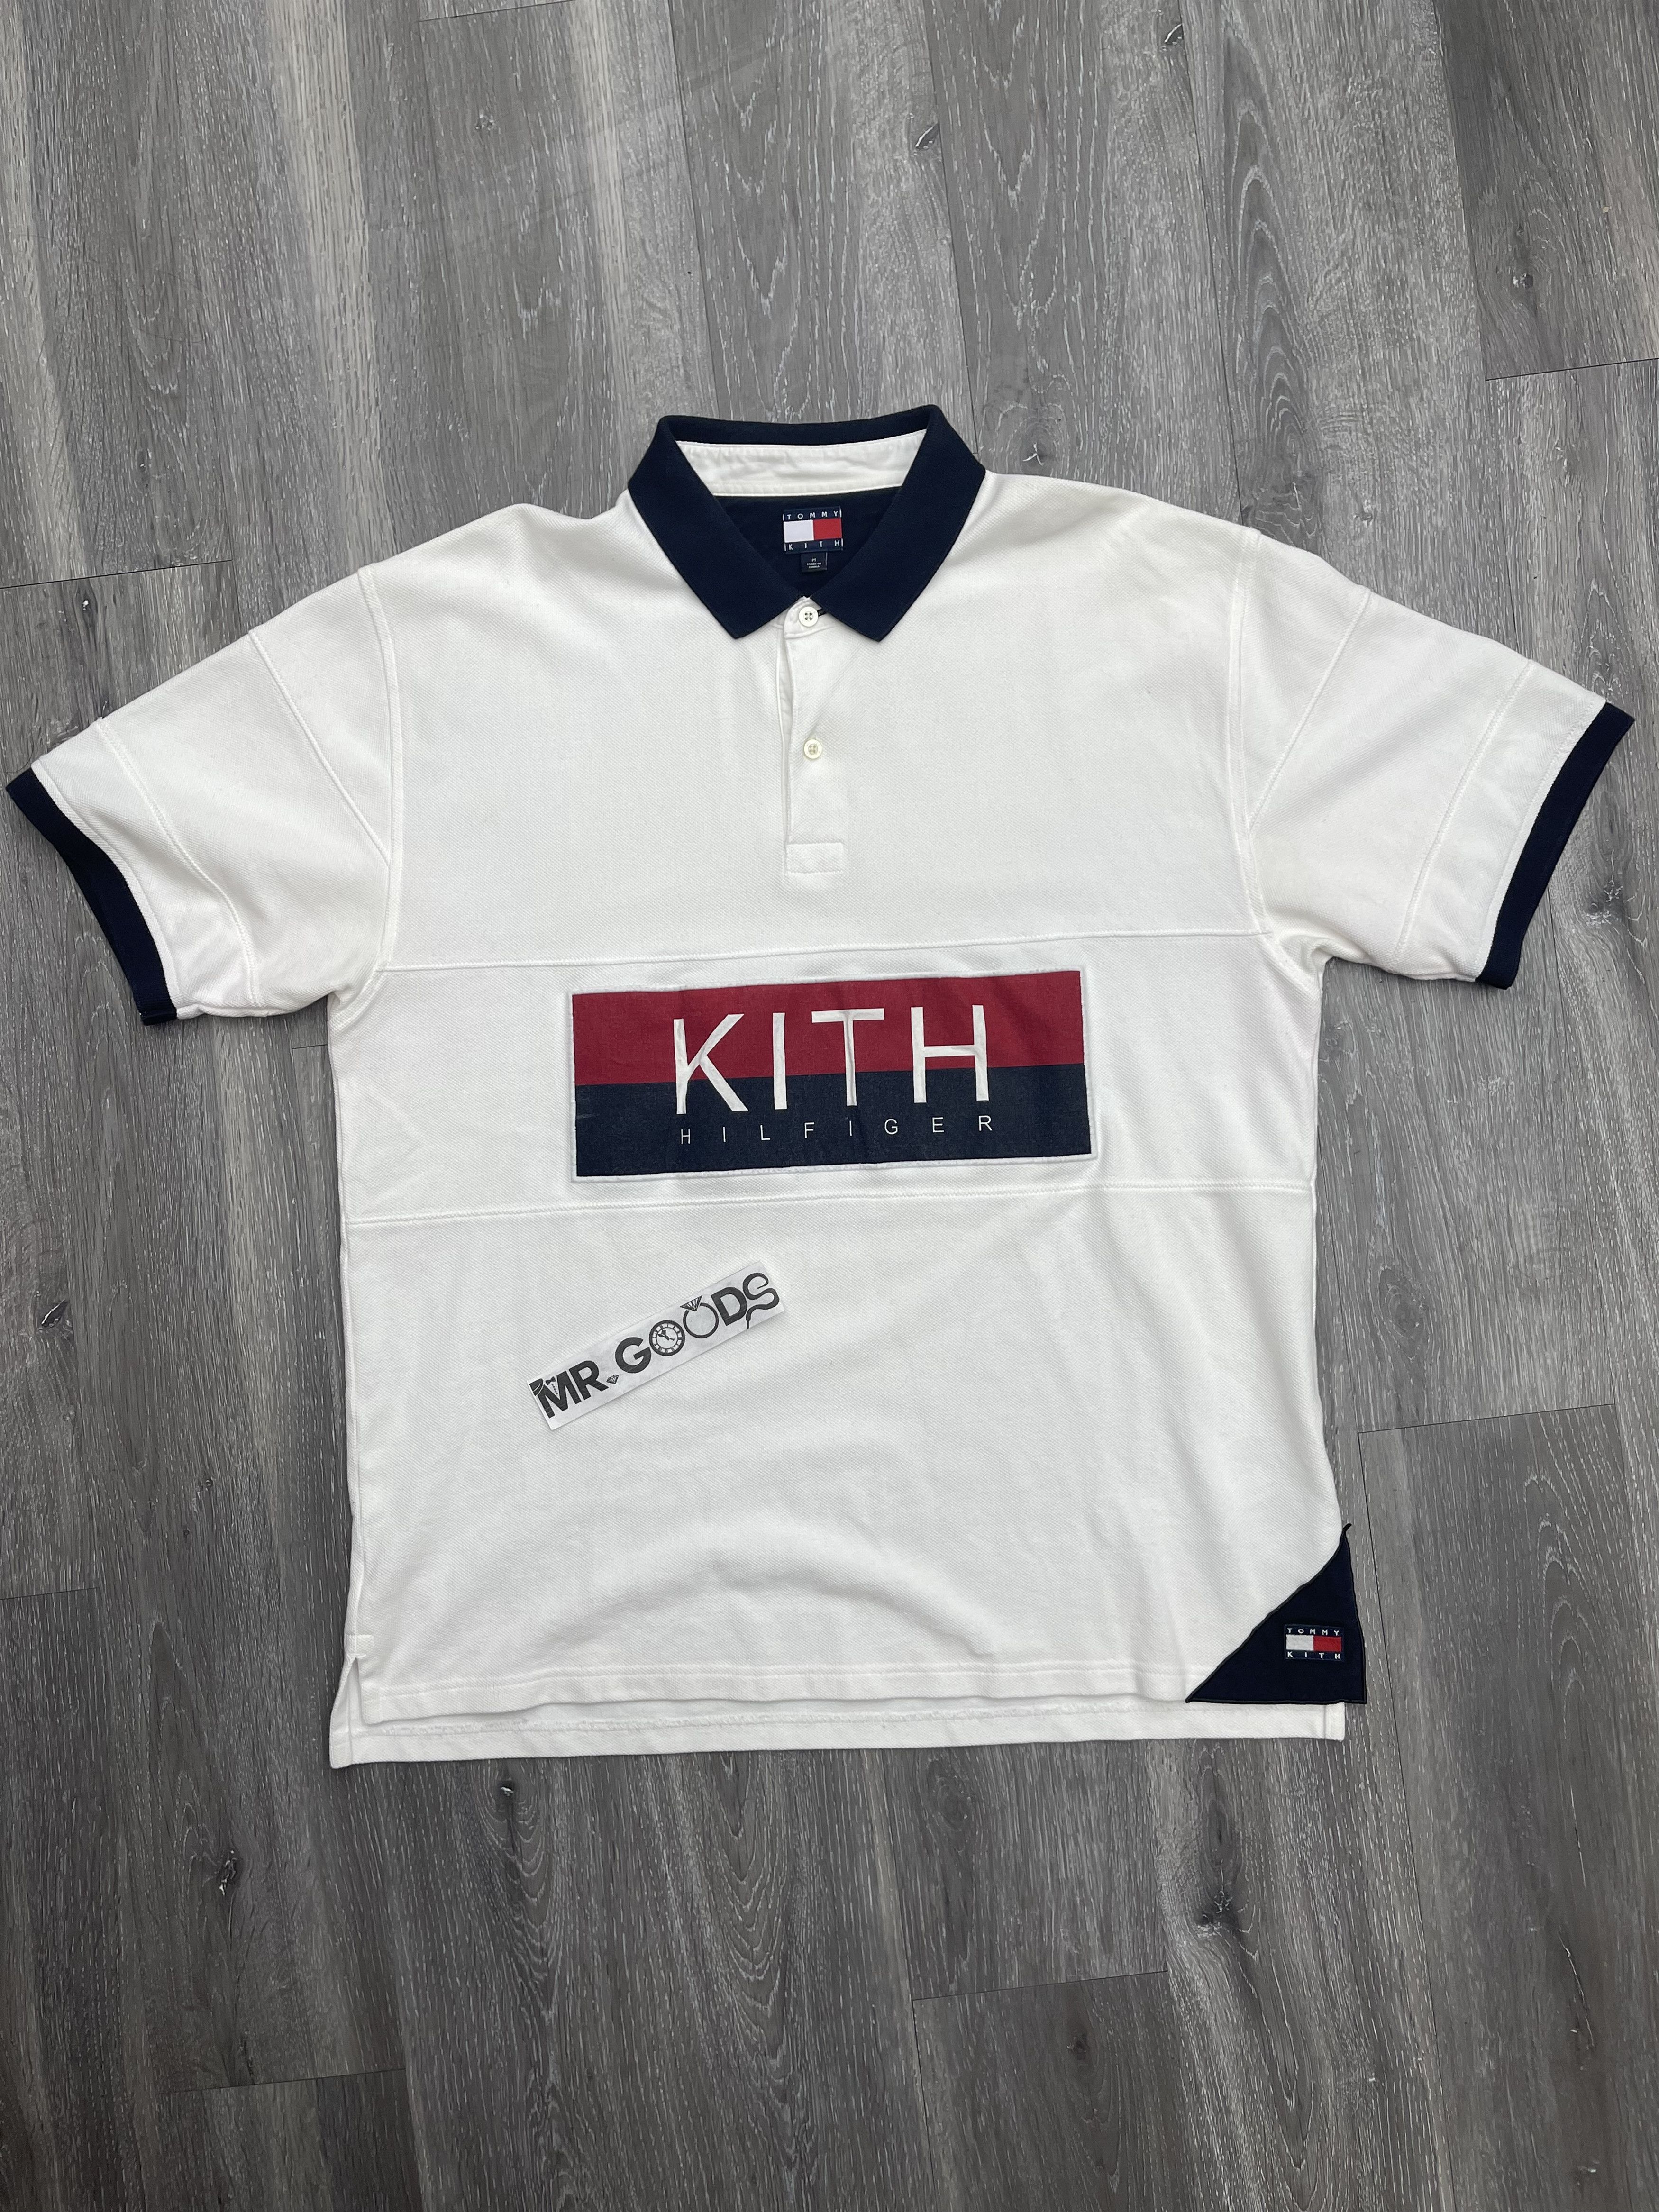 Tommy Hilfiger Kith x Tommy Hilfiger Chest Stripe Polo White | Grailed